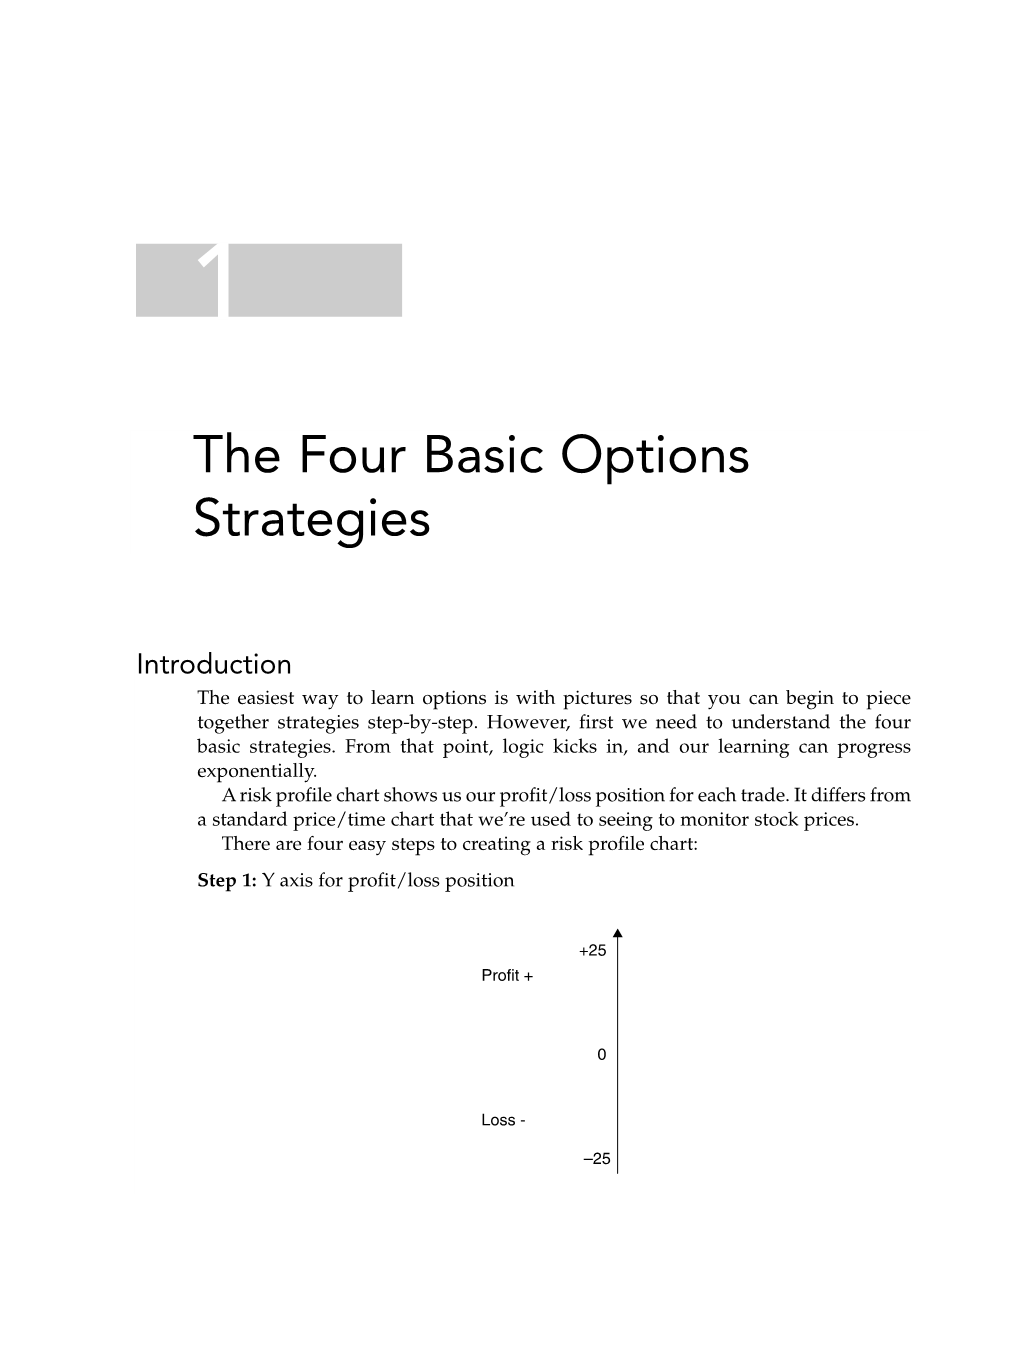 The Four Basic Options Strategies